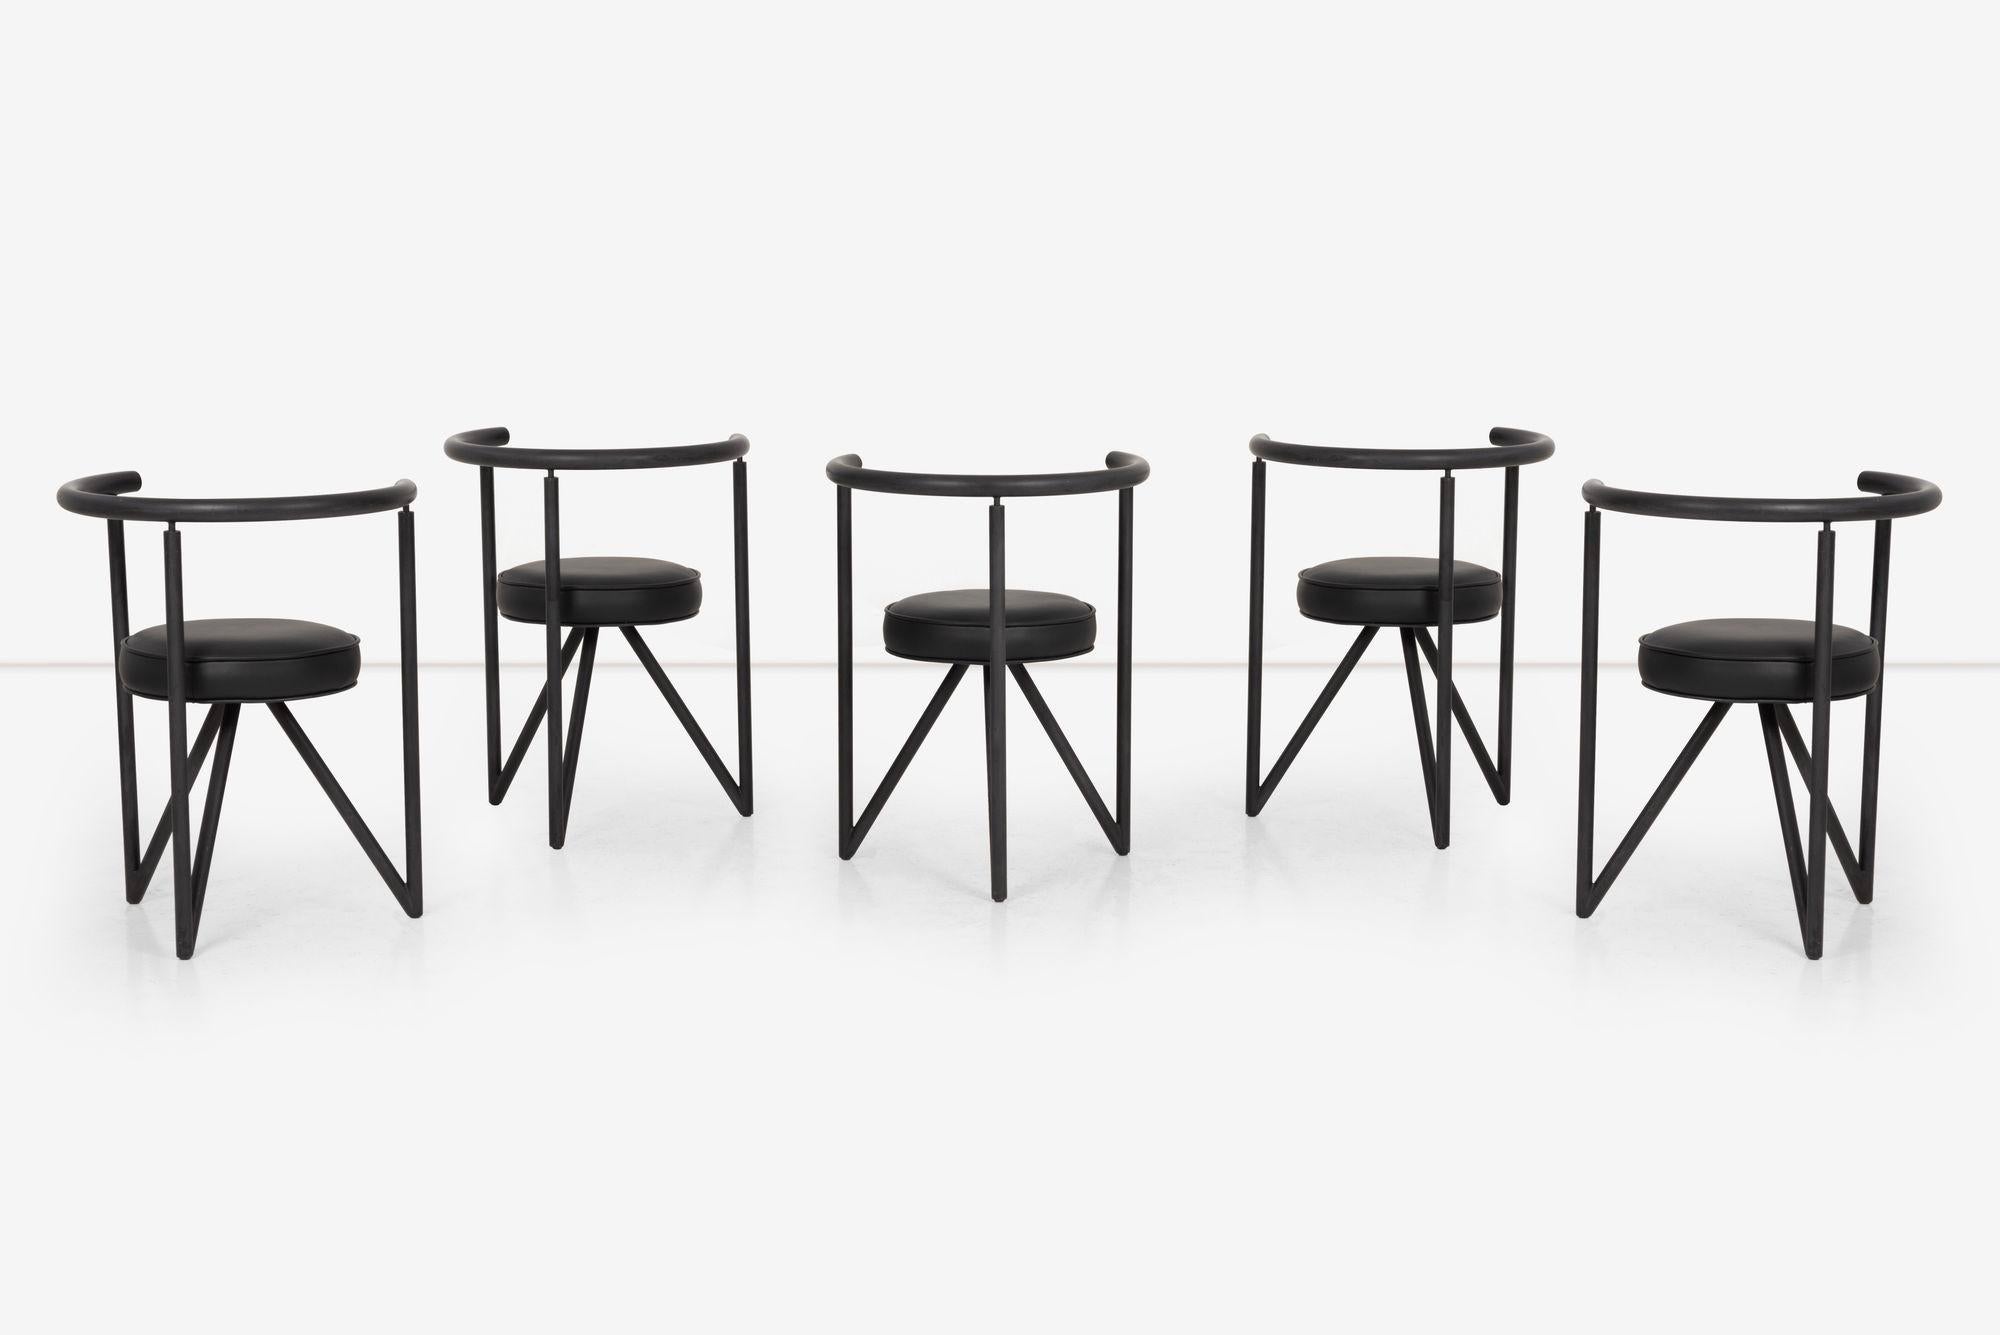 Metal Philippe Starck Miss Dorn Chairs, set of Five by Disform, Spain 1982